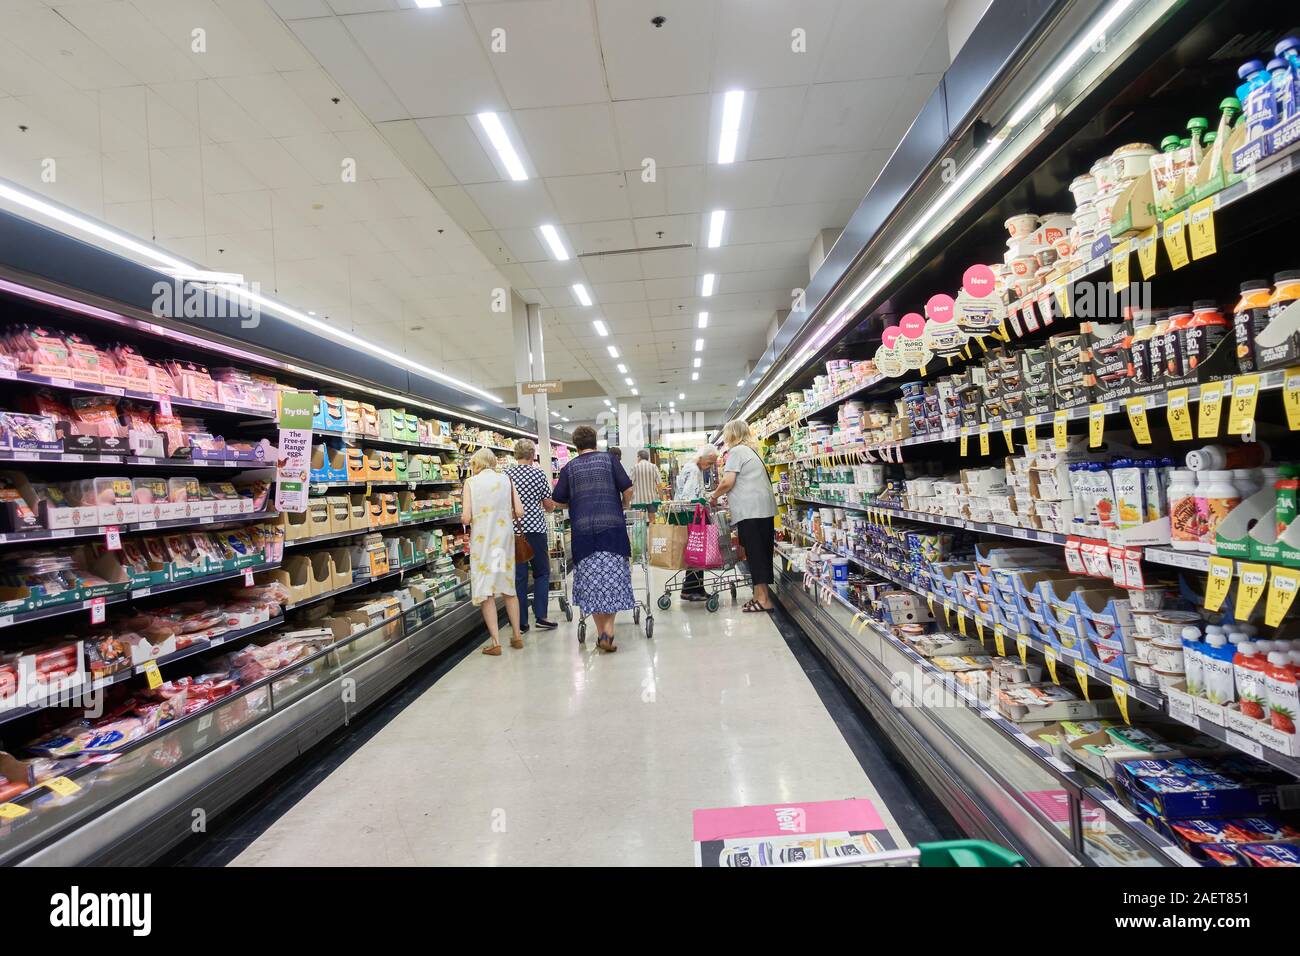 Shoppers selecting items in the refrigerated aisle of a supermarket in Australia. Stock Photo